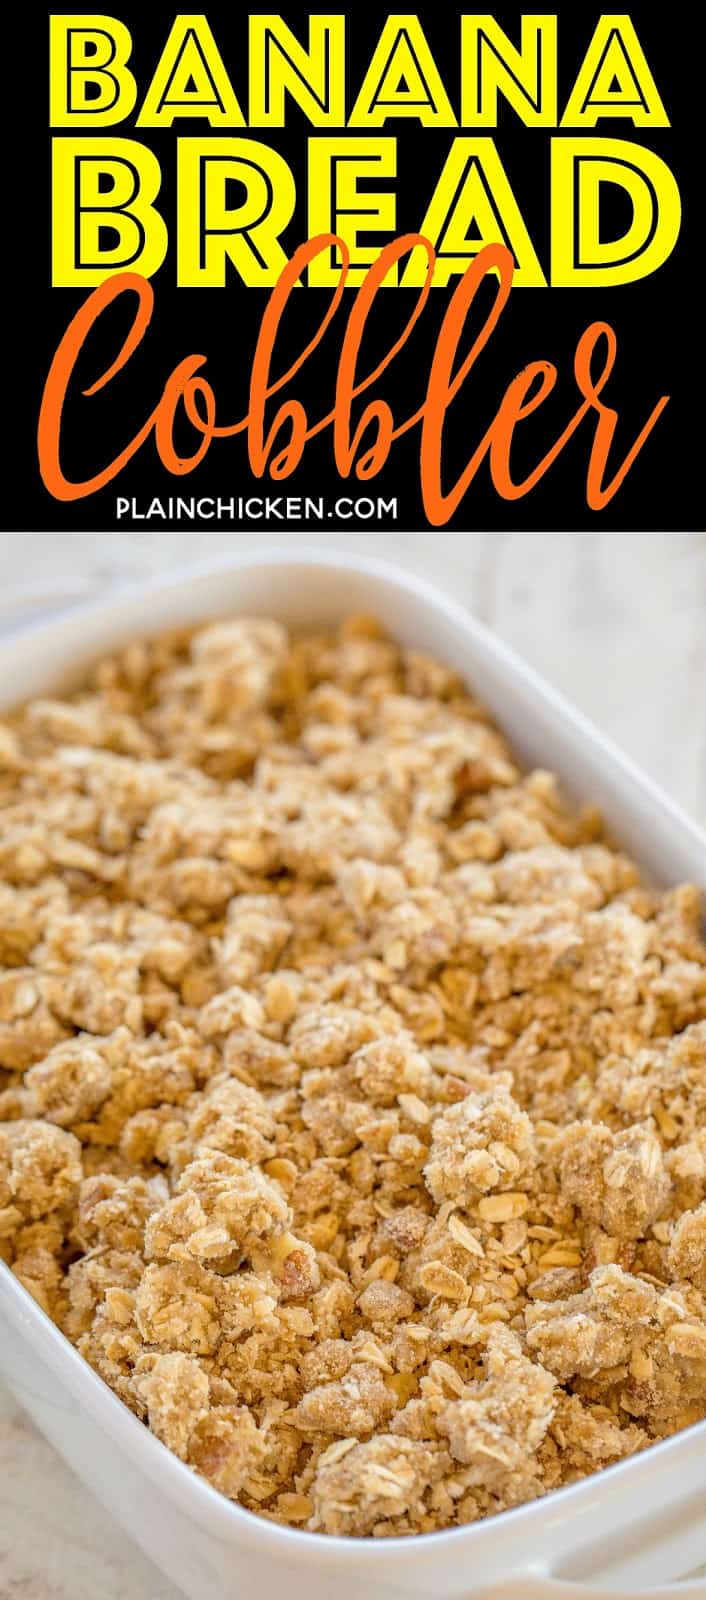 Banana Bread Cobbler - this is amazing!! SOOO much better than regular banana bread. The streusel topping makes this yummy dessert!! Self-rising flour, sugar, milk, butter, bananas, brown sugar, oatmeal and pecans. Top with vanilla ice cream and caramel sauce! This is lick-the-plate delicious!!! #bananabread #cobbler #dessert #dessertrecipe